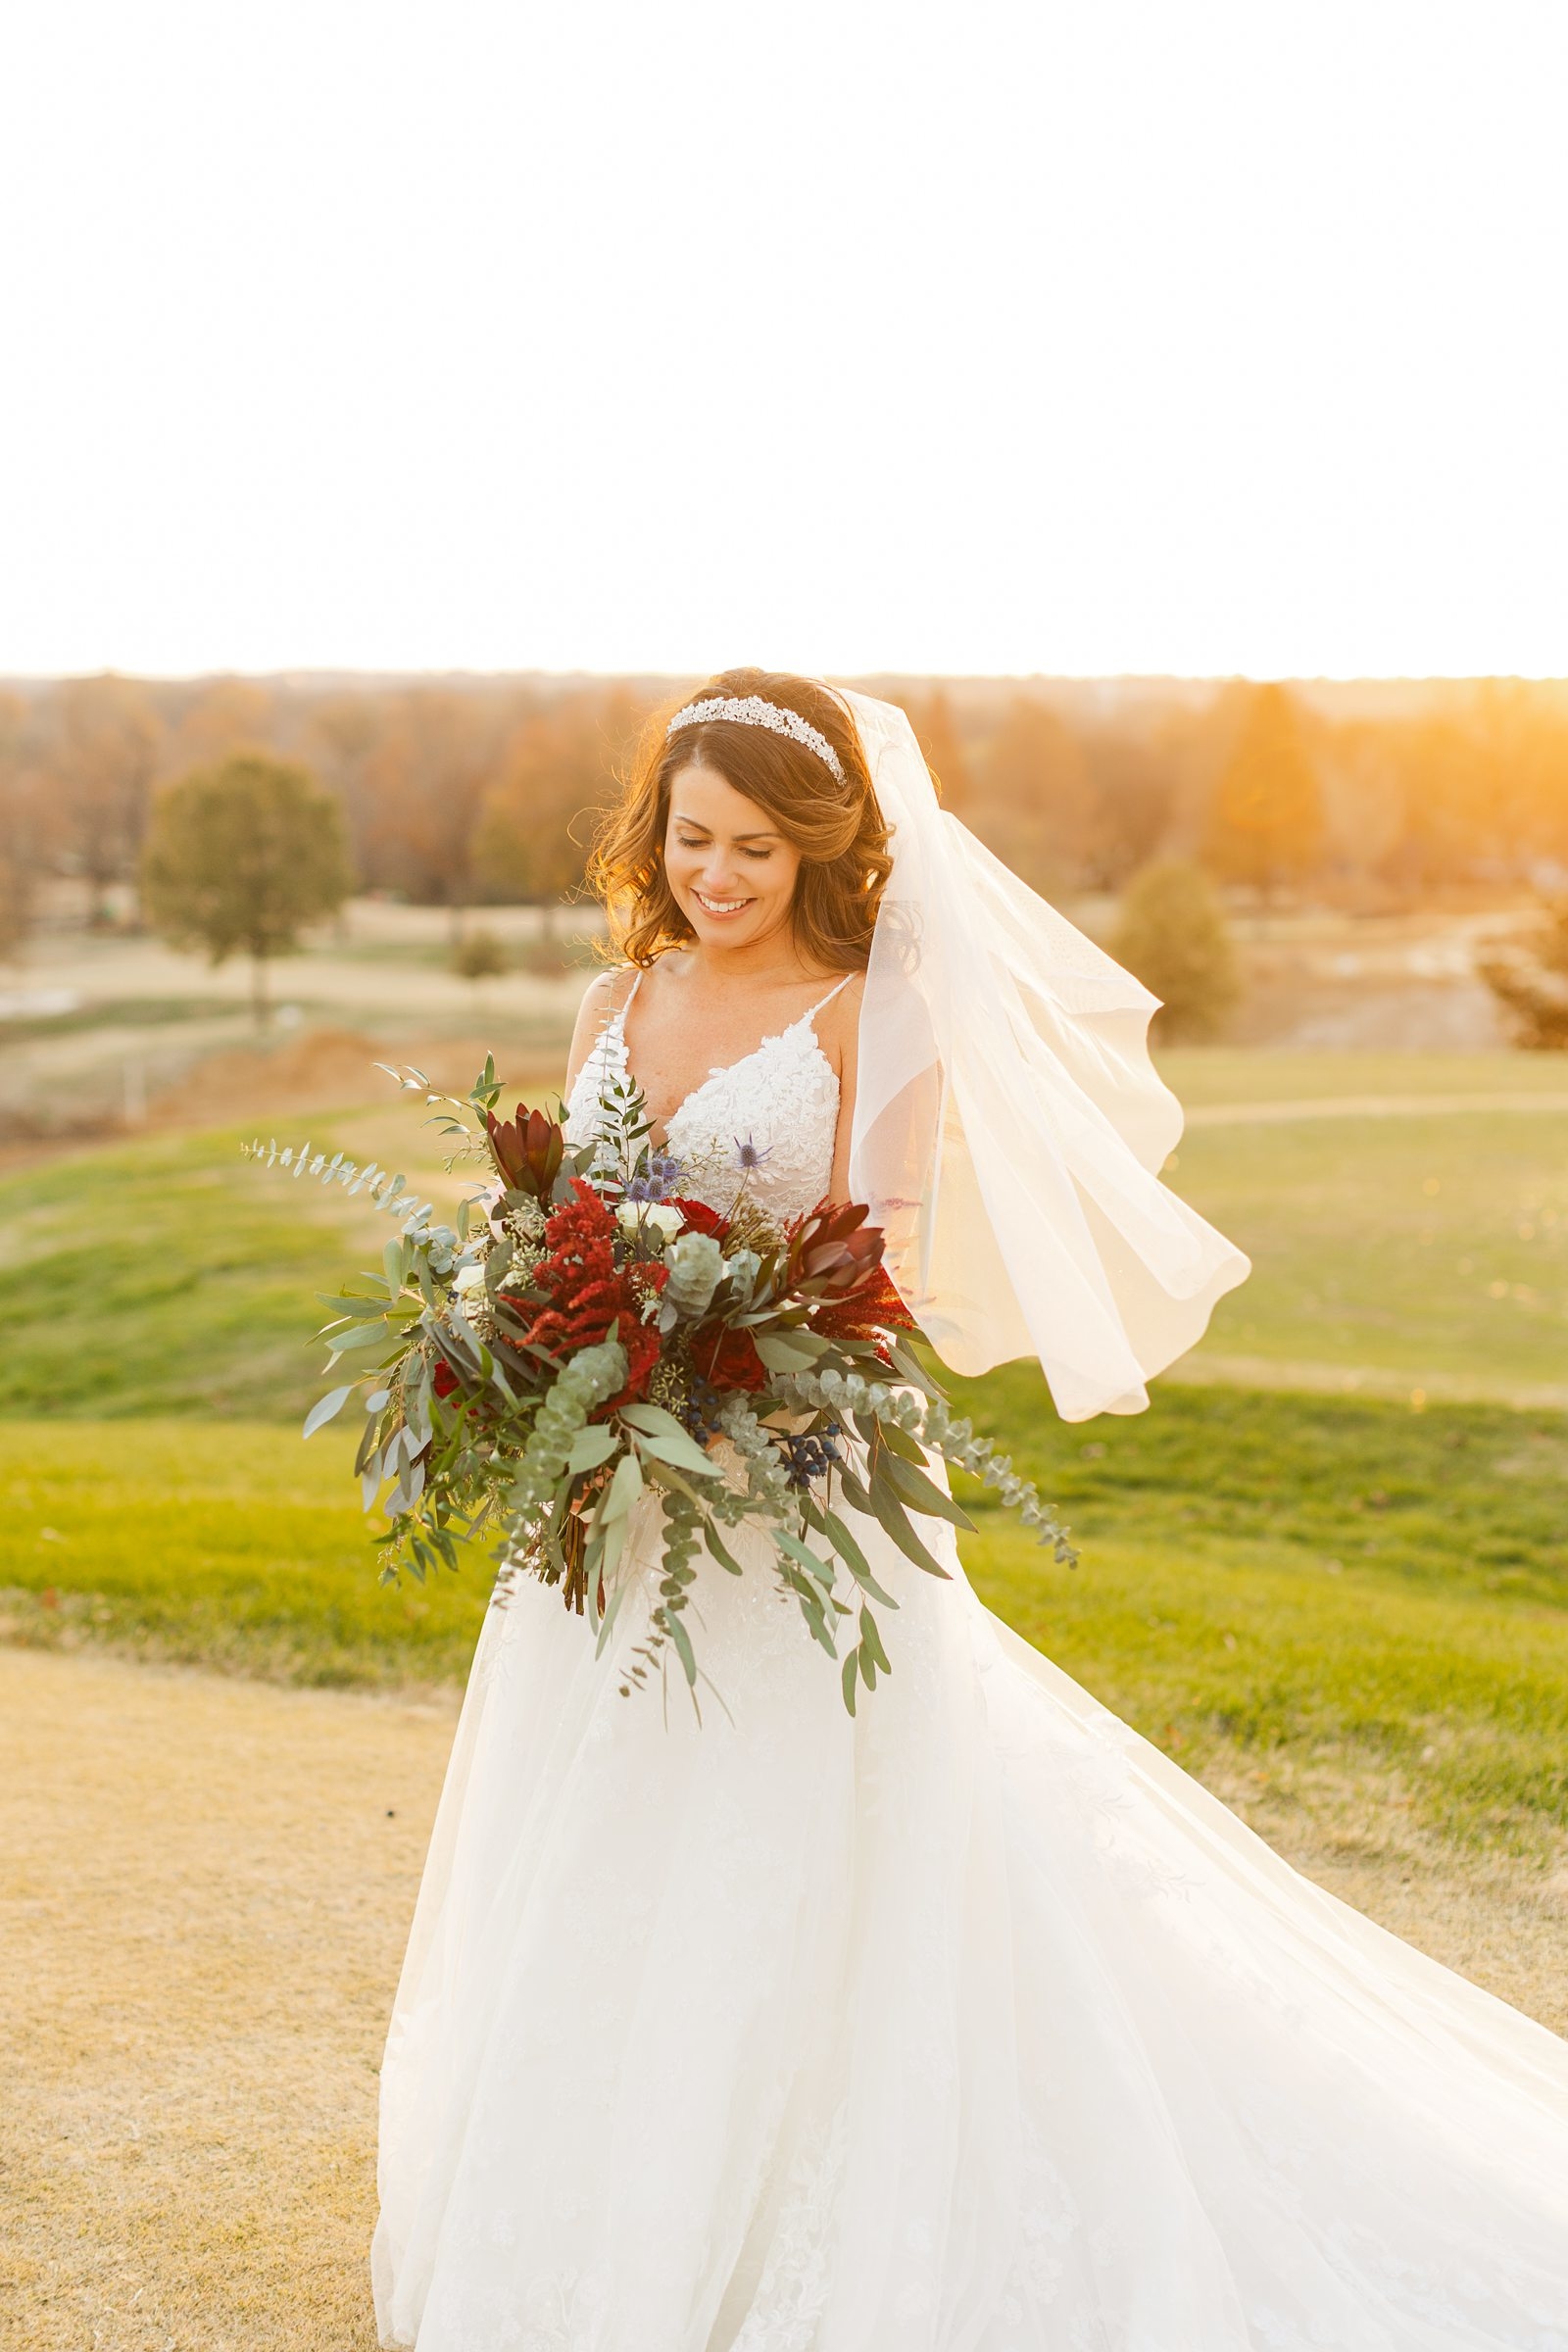 An Evansville Country Club Wedding | Abby and Wes | 154.jpg